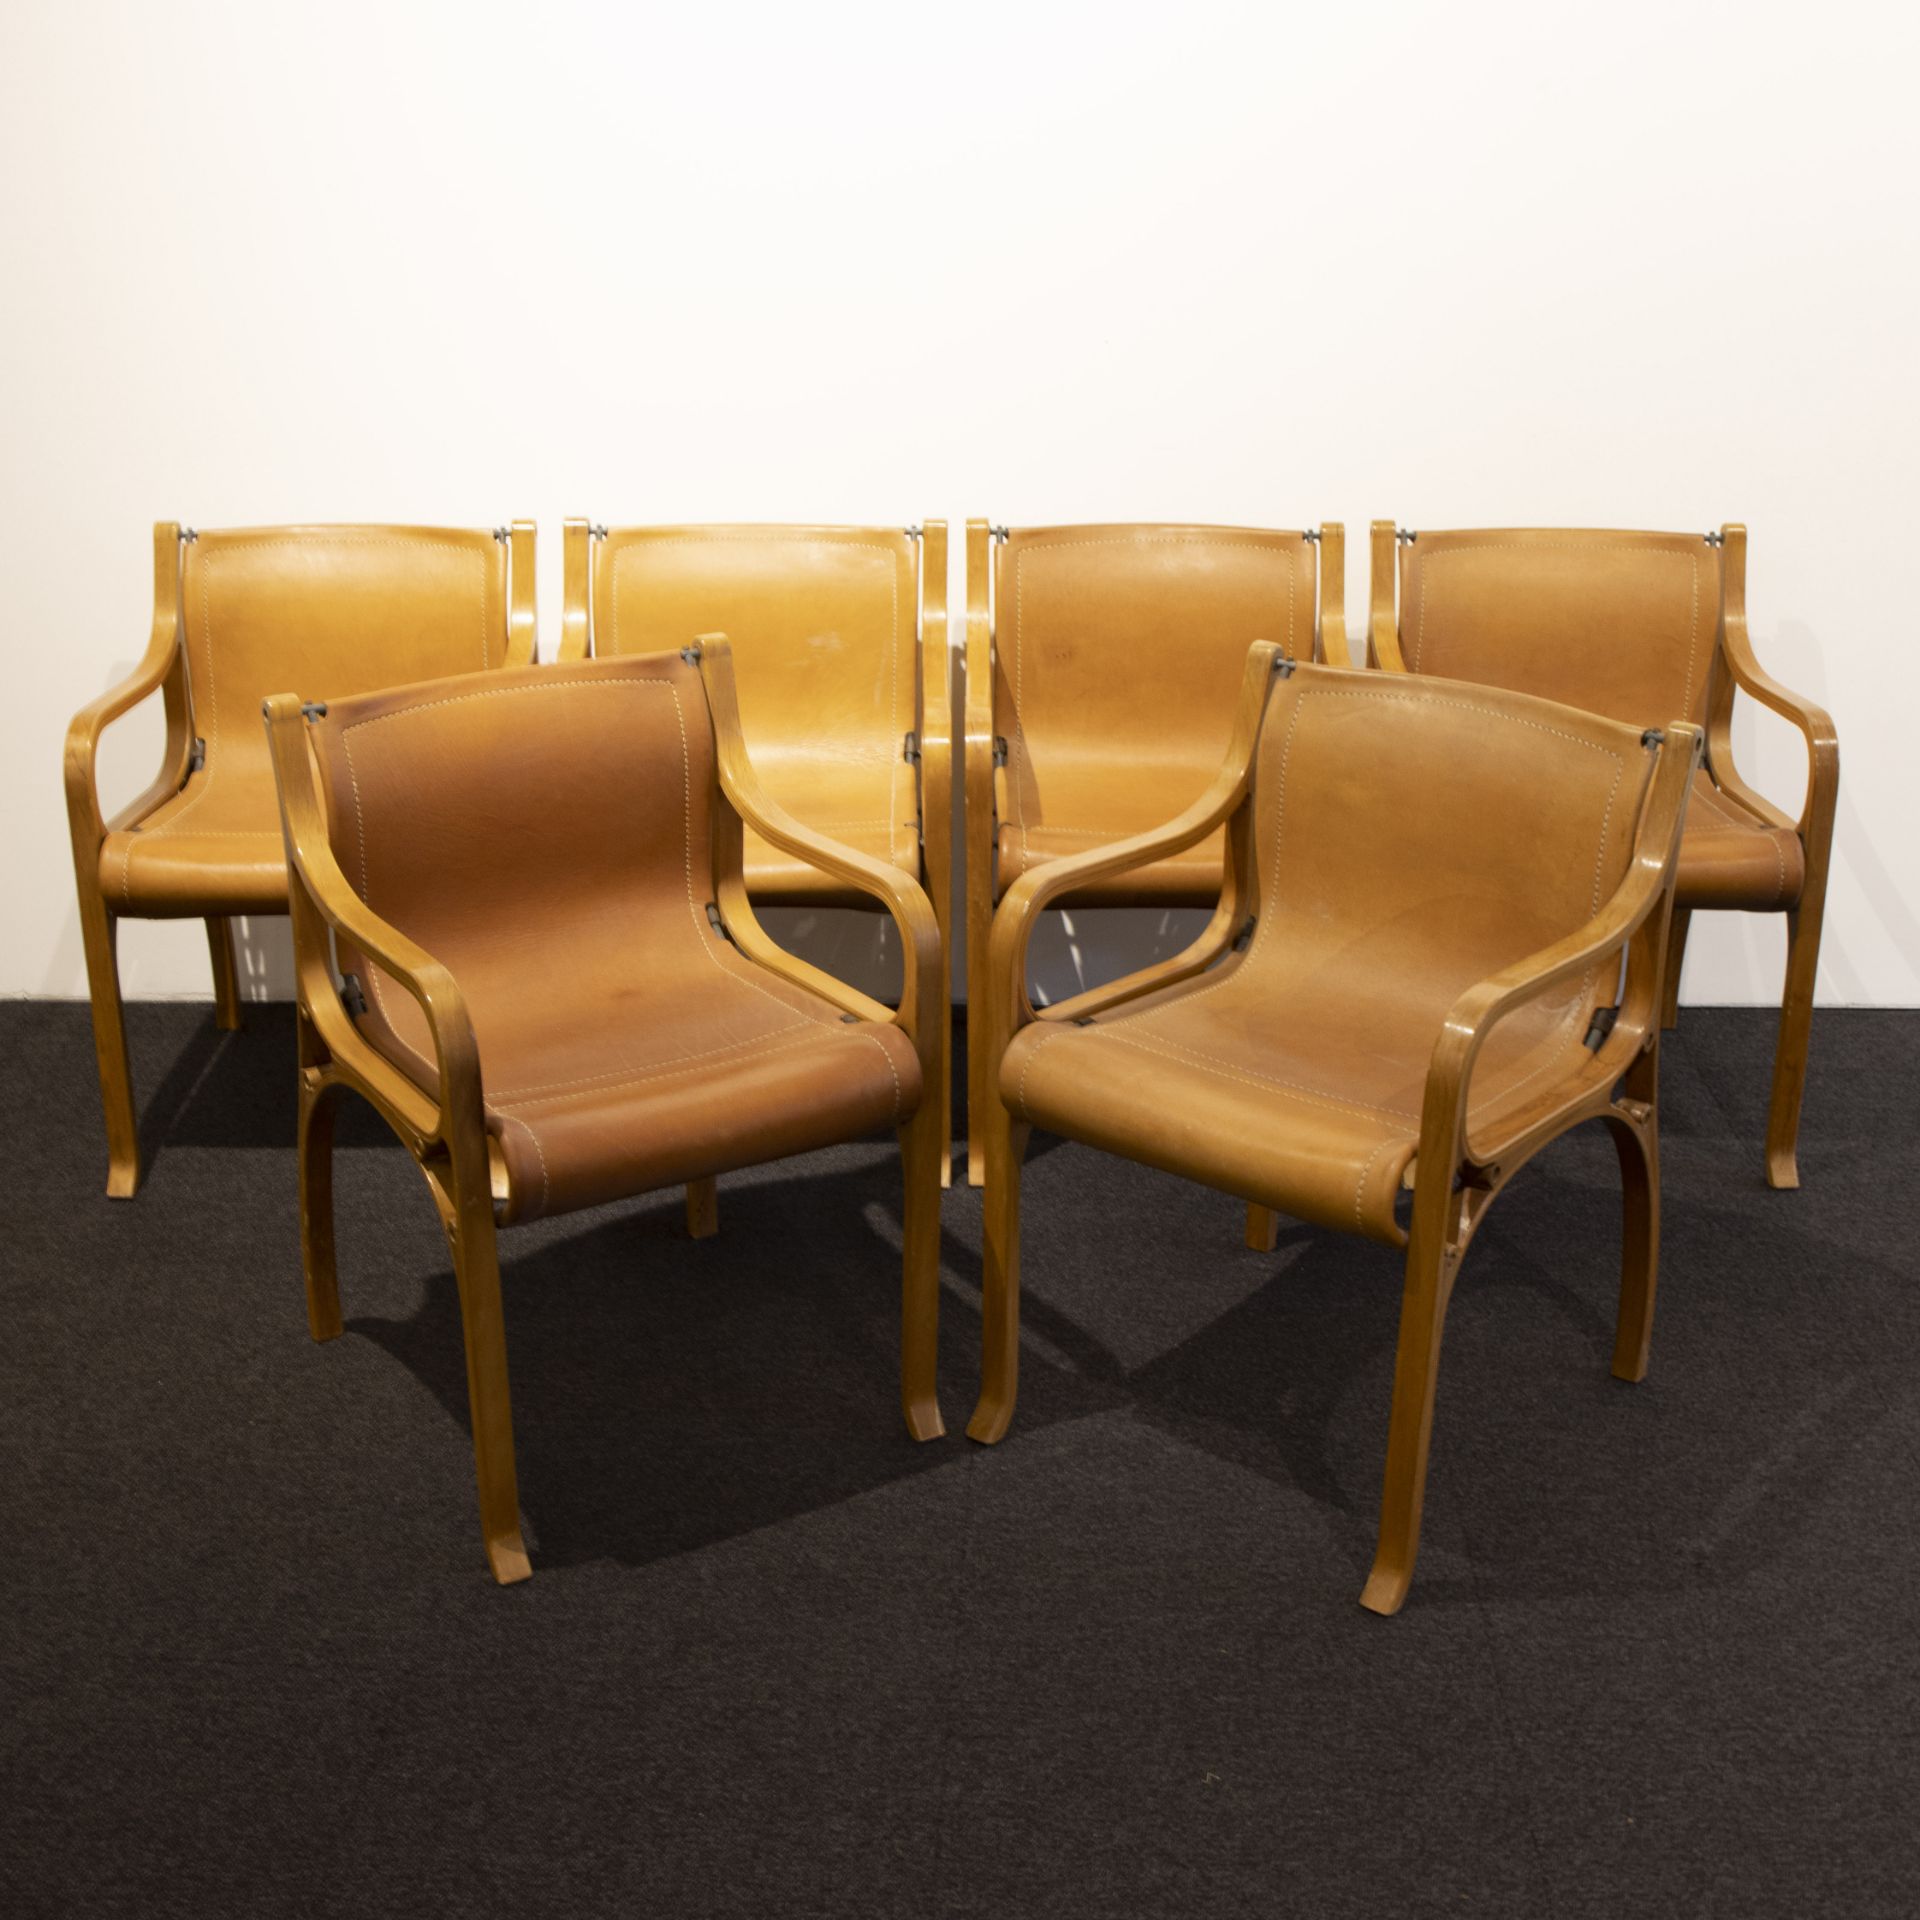 A set of six armchairs by Cristian Valdes, 'model B', leather, steel tubing and laminated wood, desi